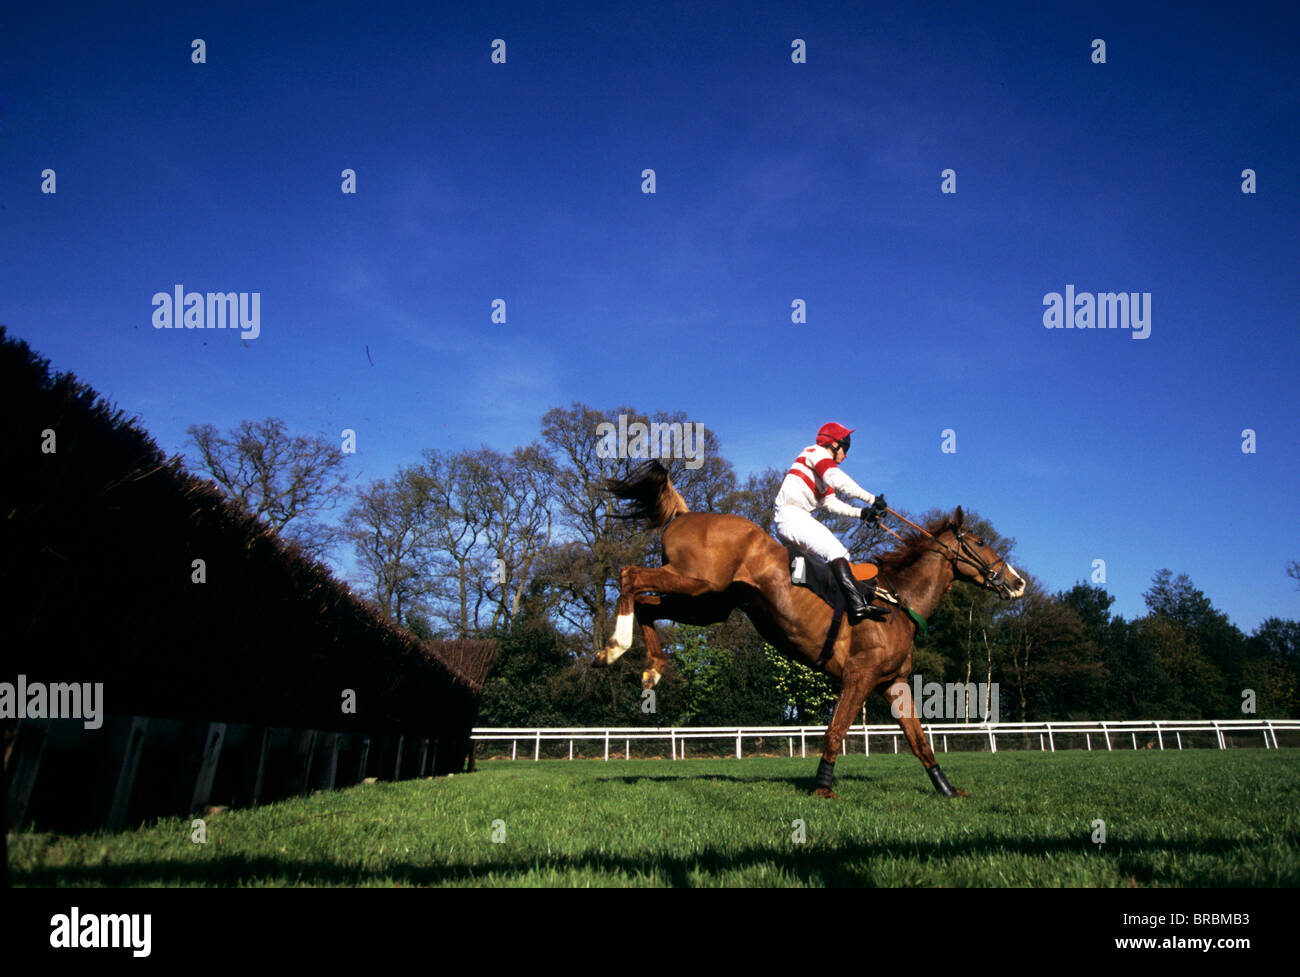 Horse and jockey land safely over large steeplechase fence in race Stock Photo